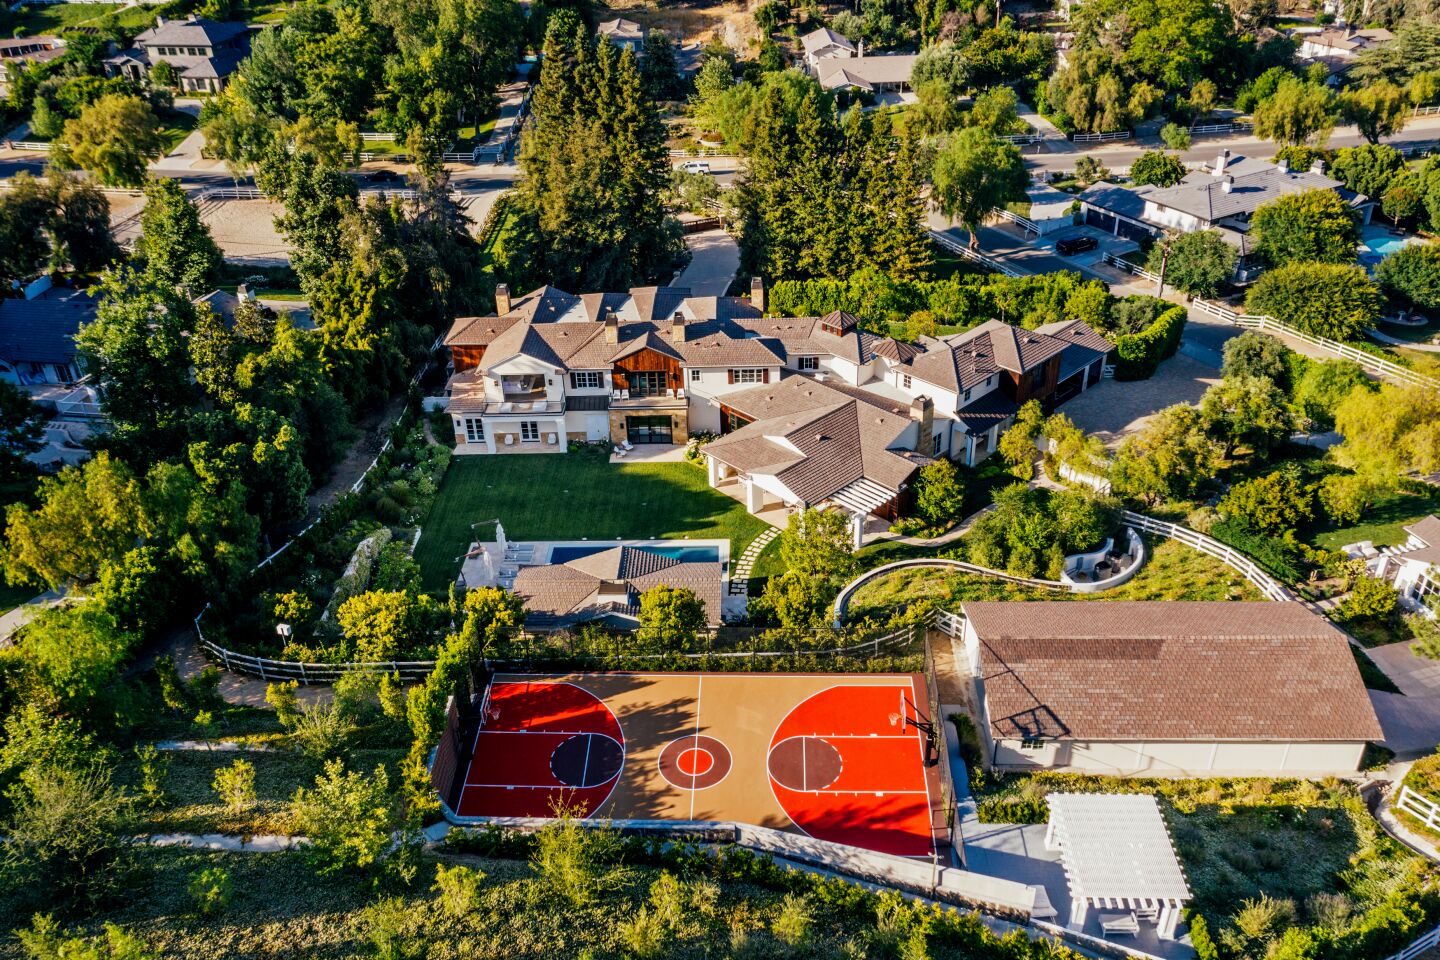 Tesfaye, better known by his stage name The Weeknd, listed his massive estate in Hidden Hills for sale at $24.995 million.